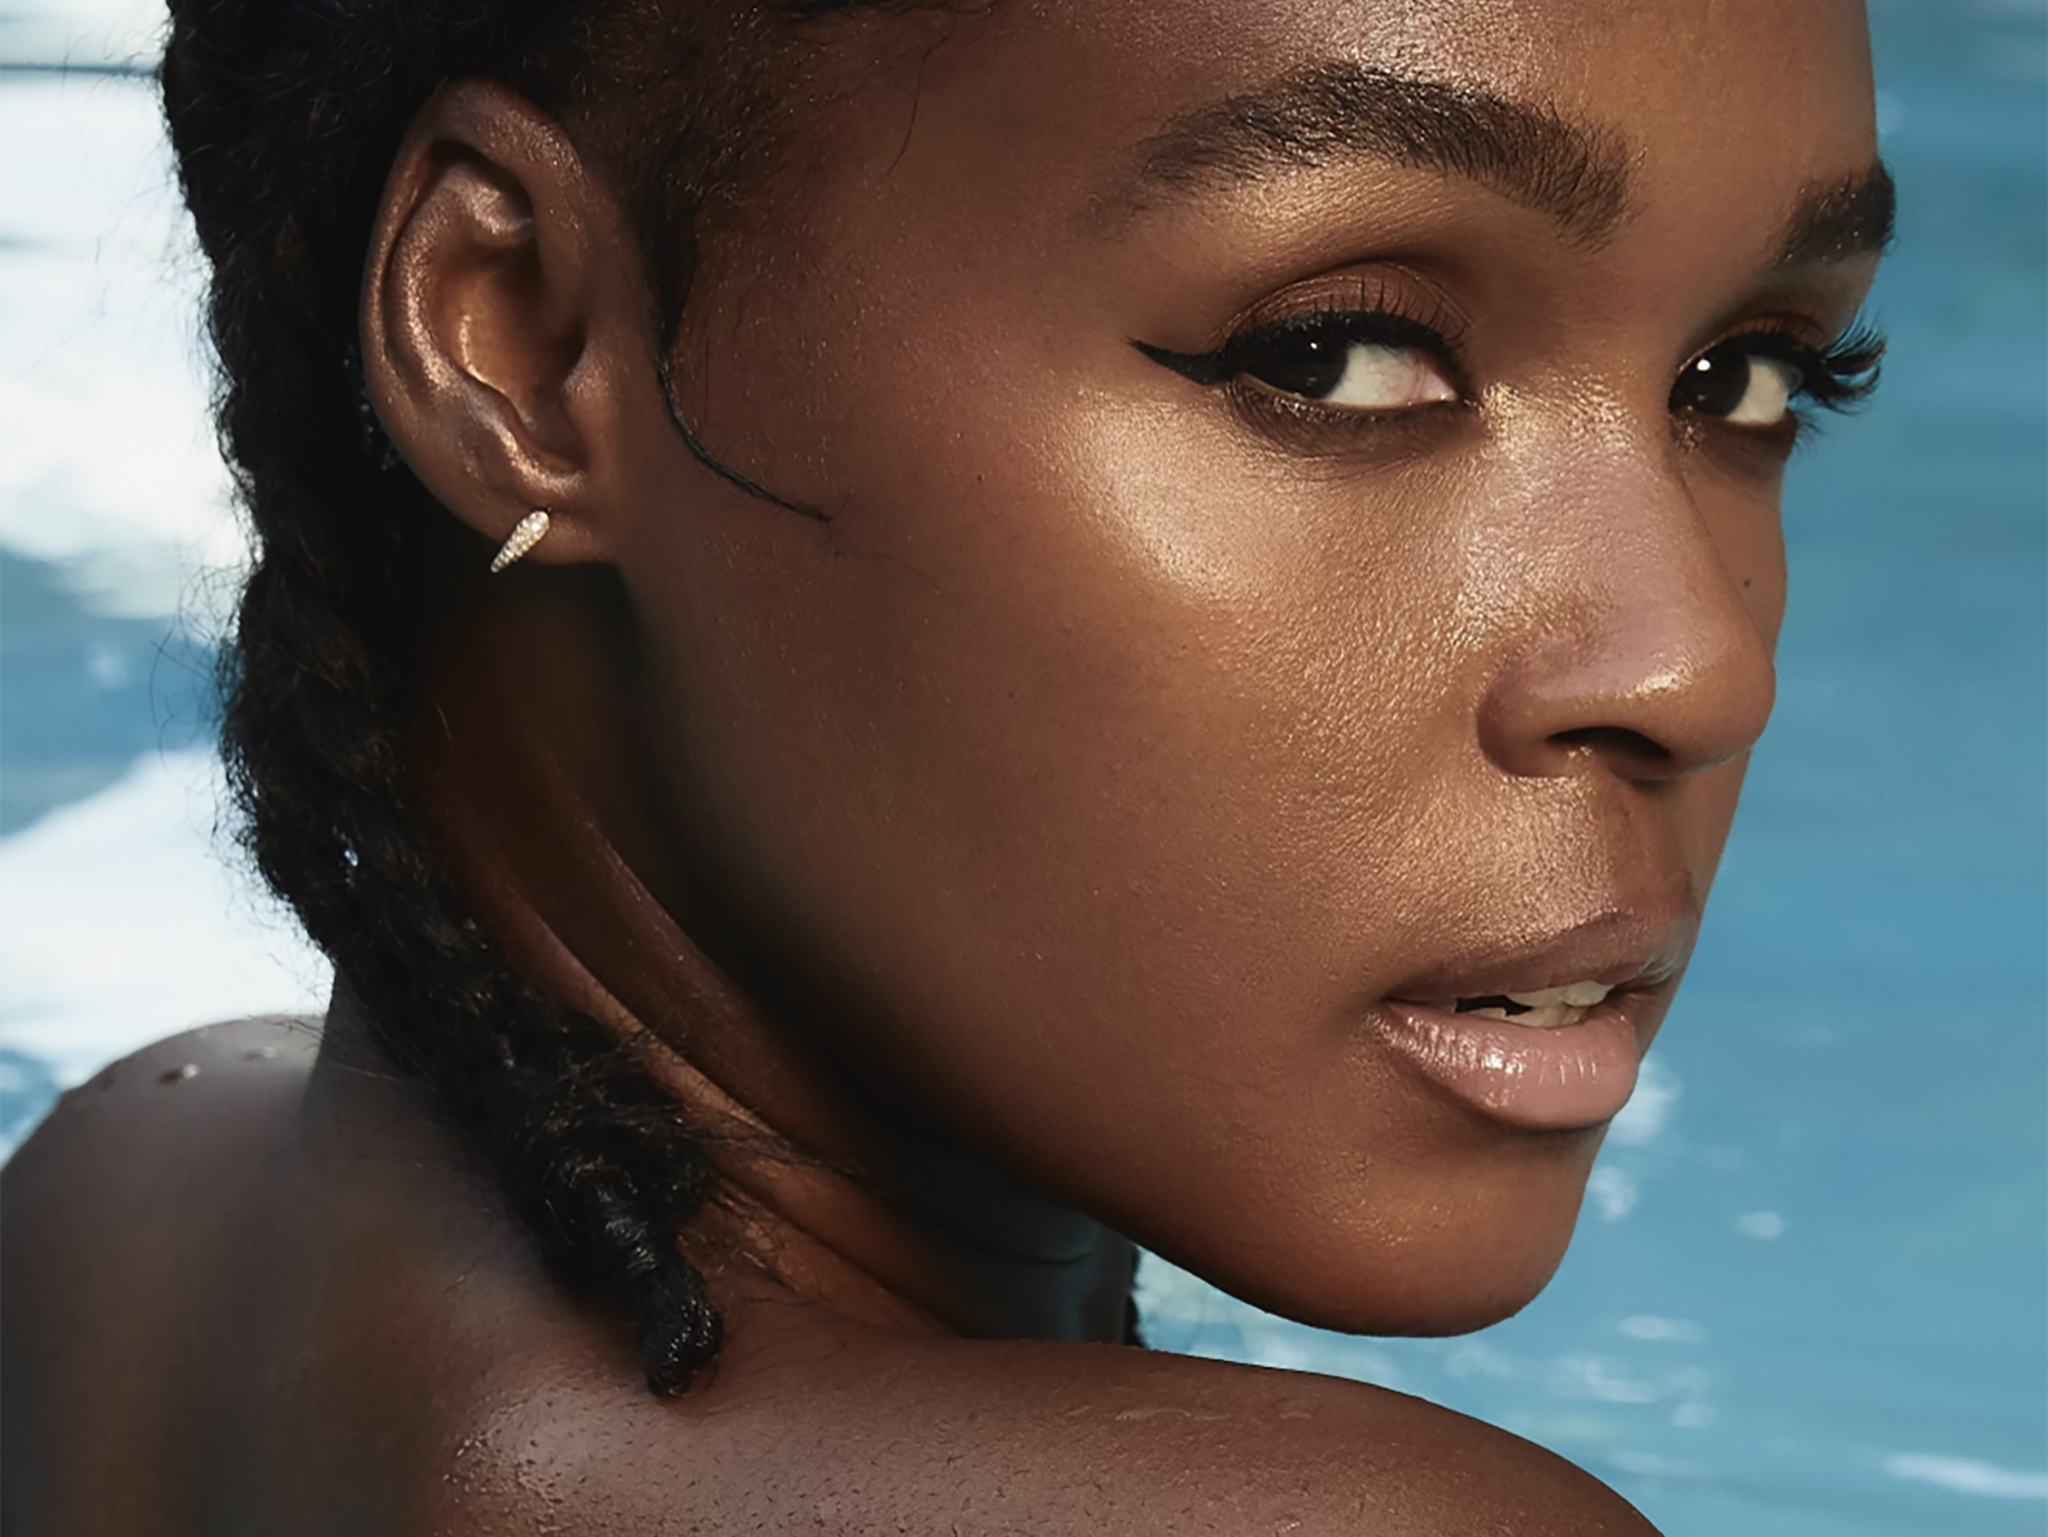 On her fourth album, Janelle Monáe embodies the happiest person at the orgy